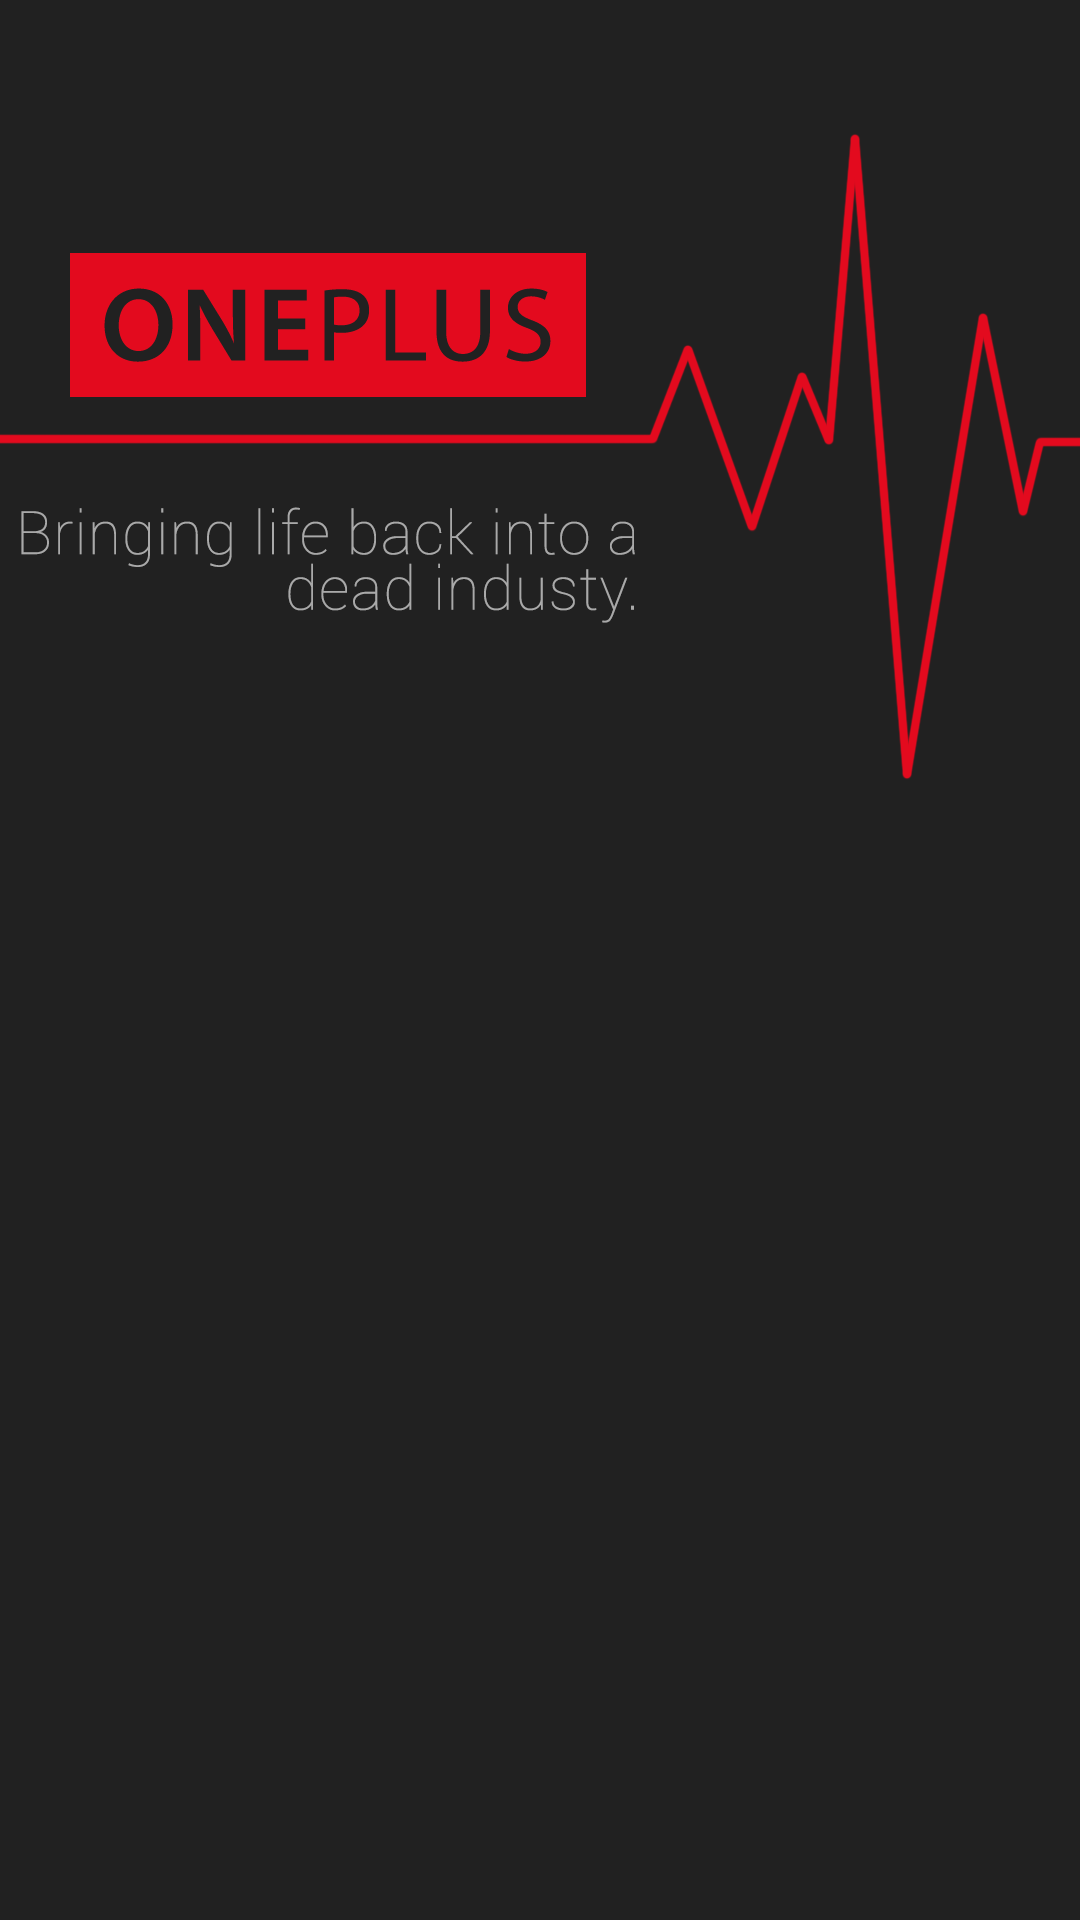 Stock Wallpaper Of One Plus The